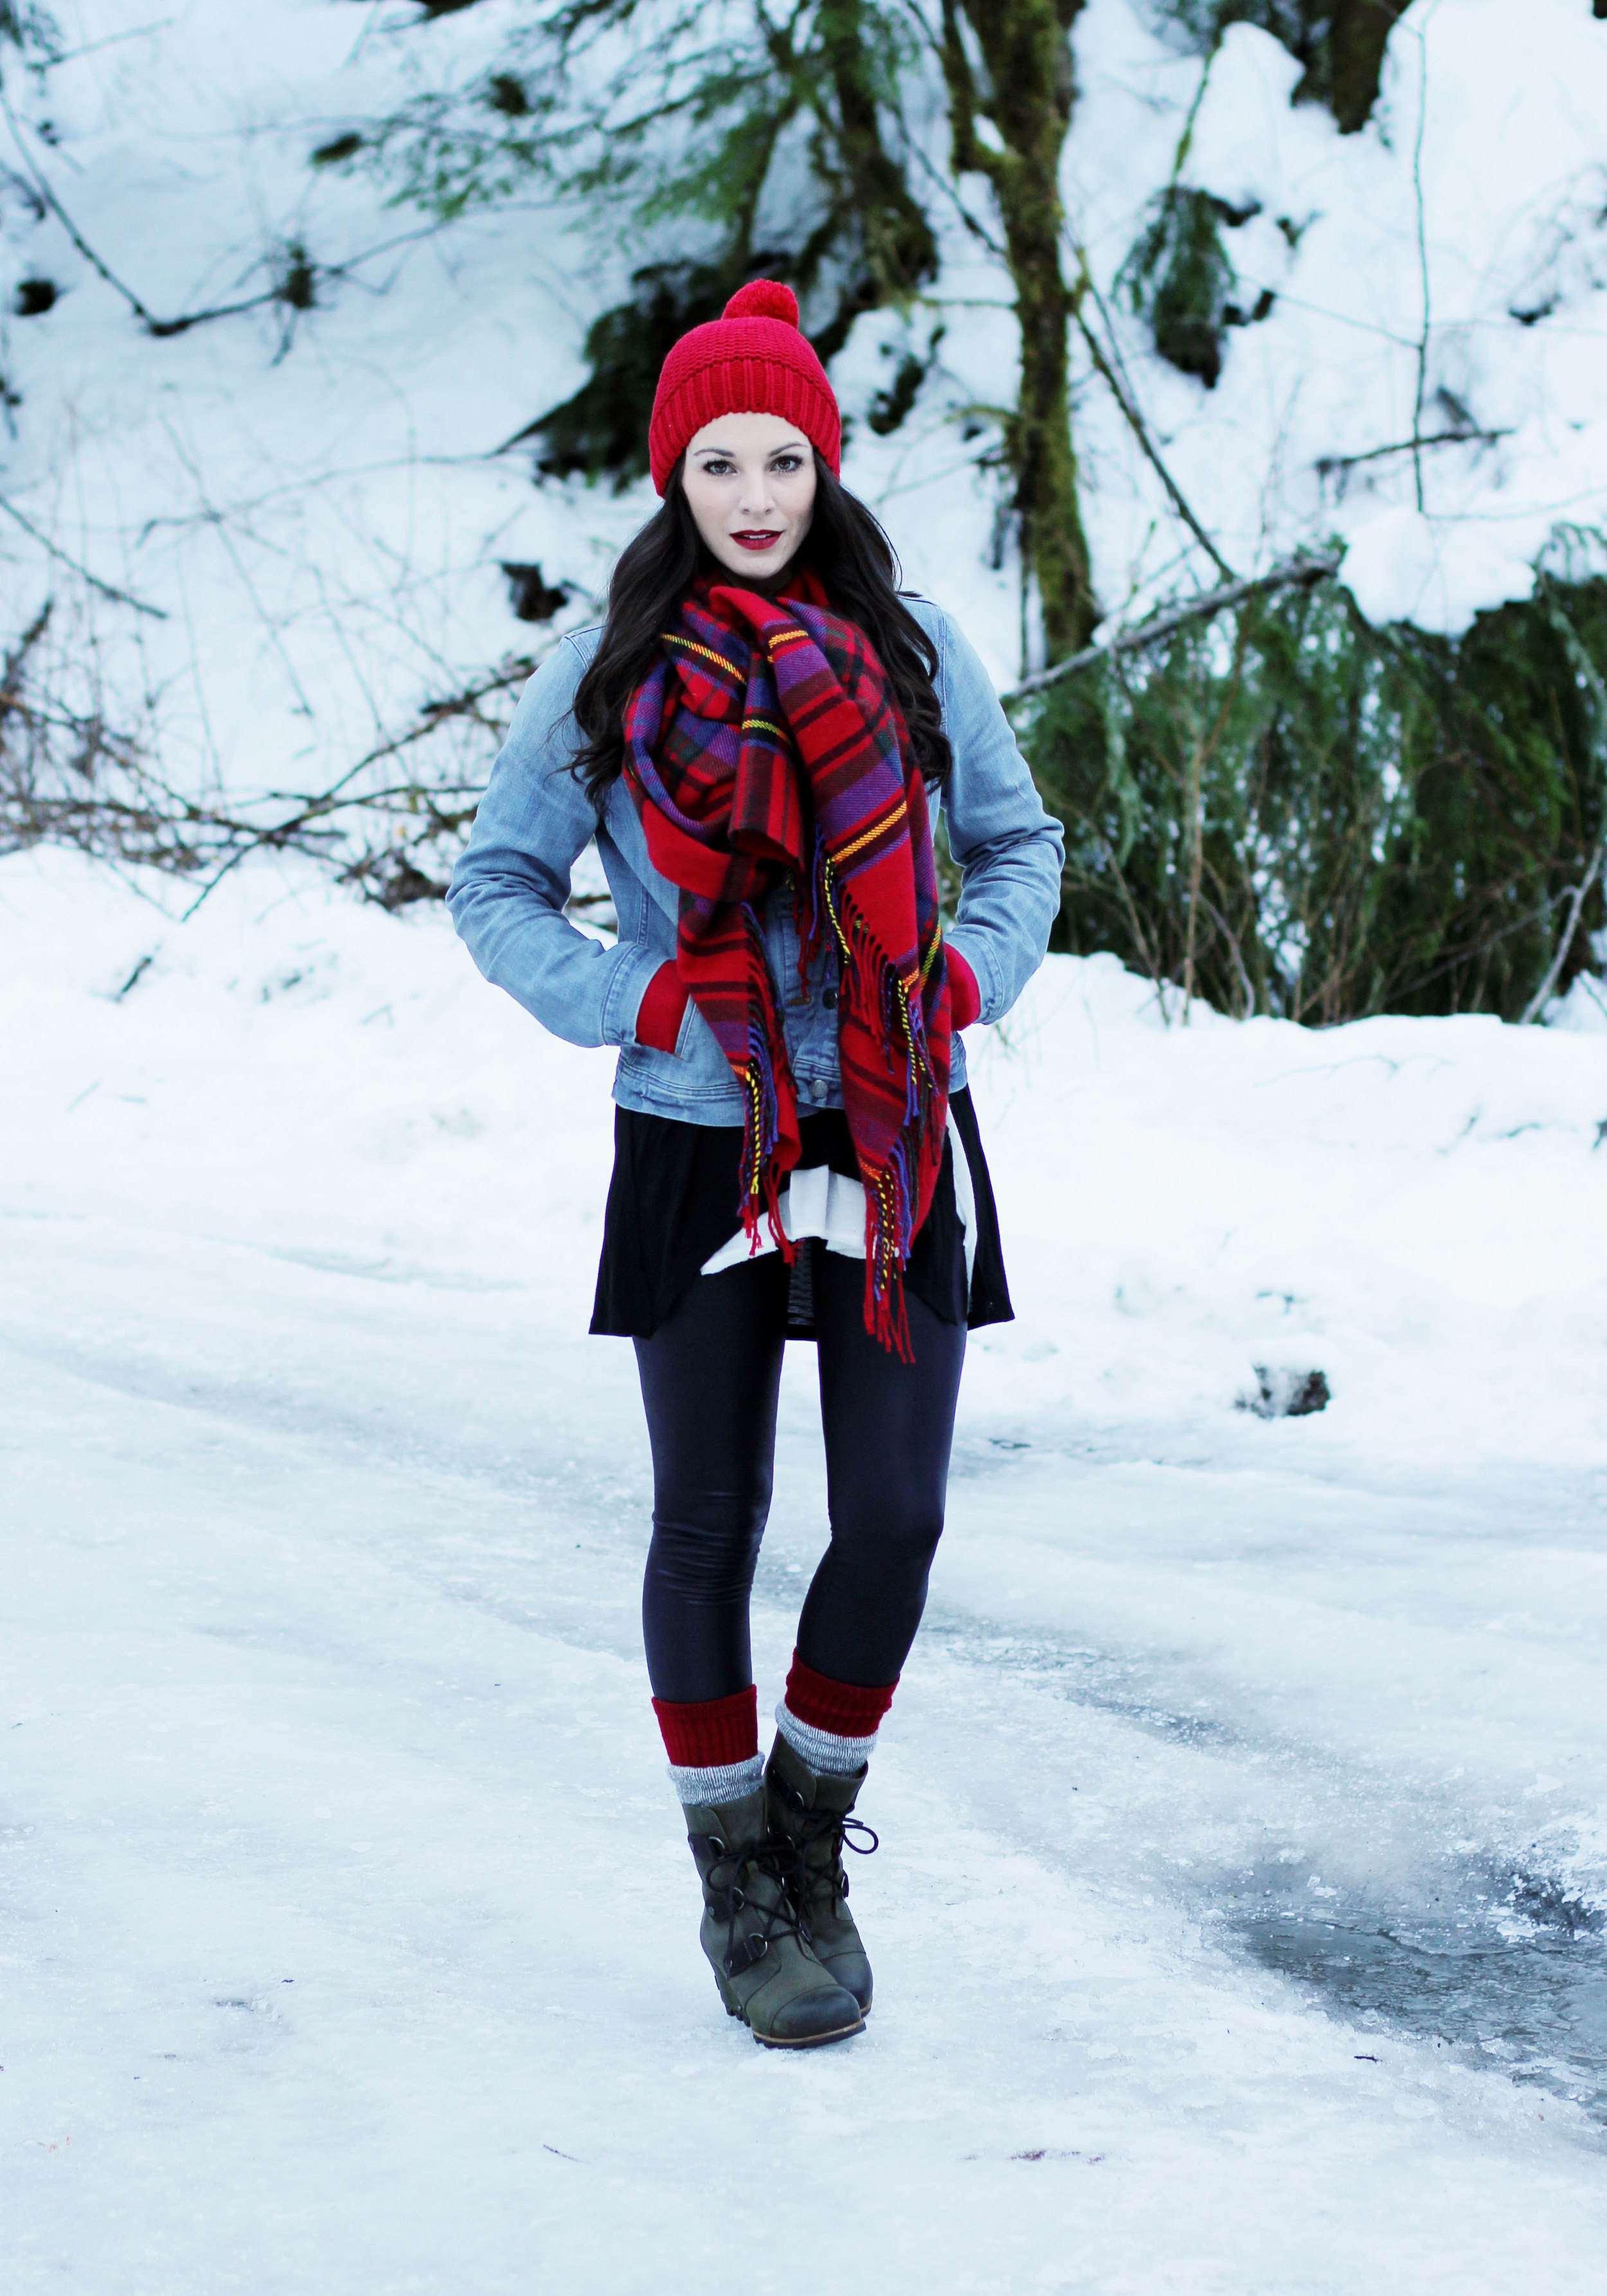 Winter Outfit, Snow Day Outfit, J.Crew Denim Jacket, Plaid Blanket Scarf, Red Gap Beanie with Pom Pom, Sorel Joan Of Arctic Wedge Boots, Long Layering Tees